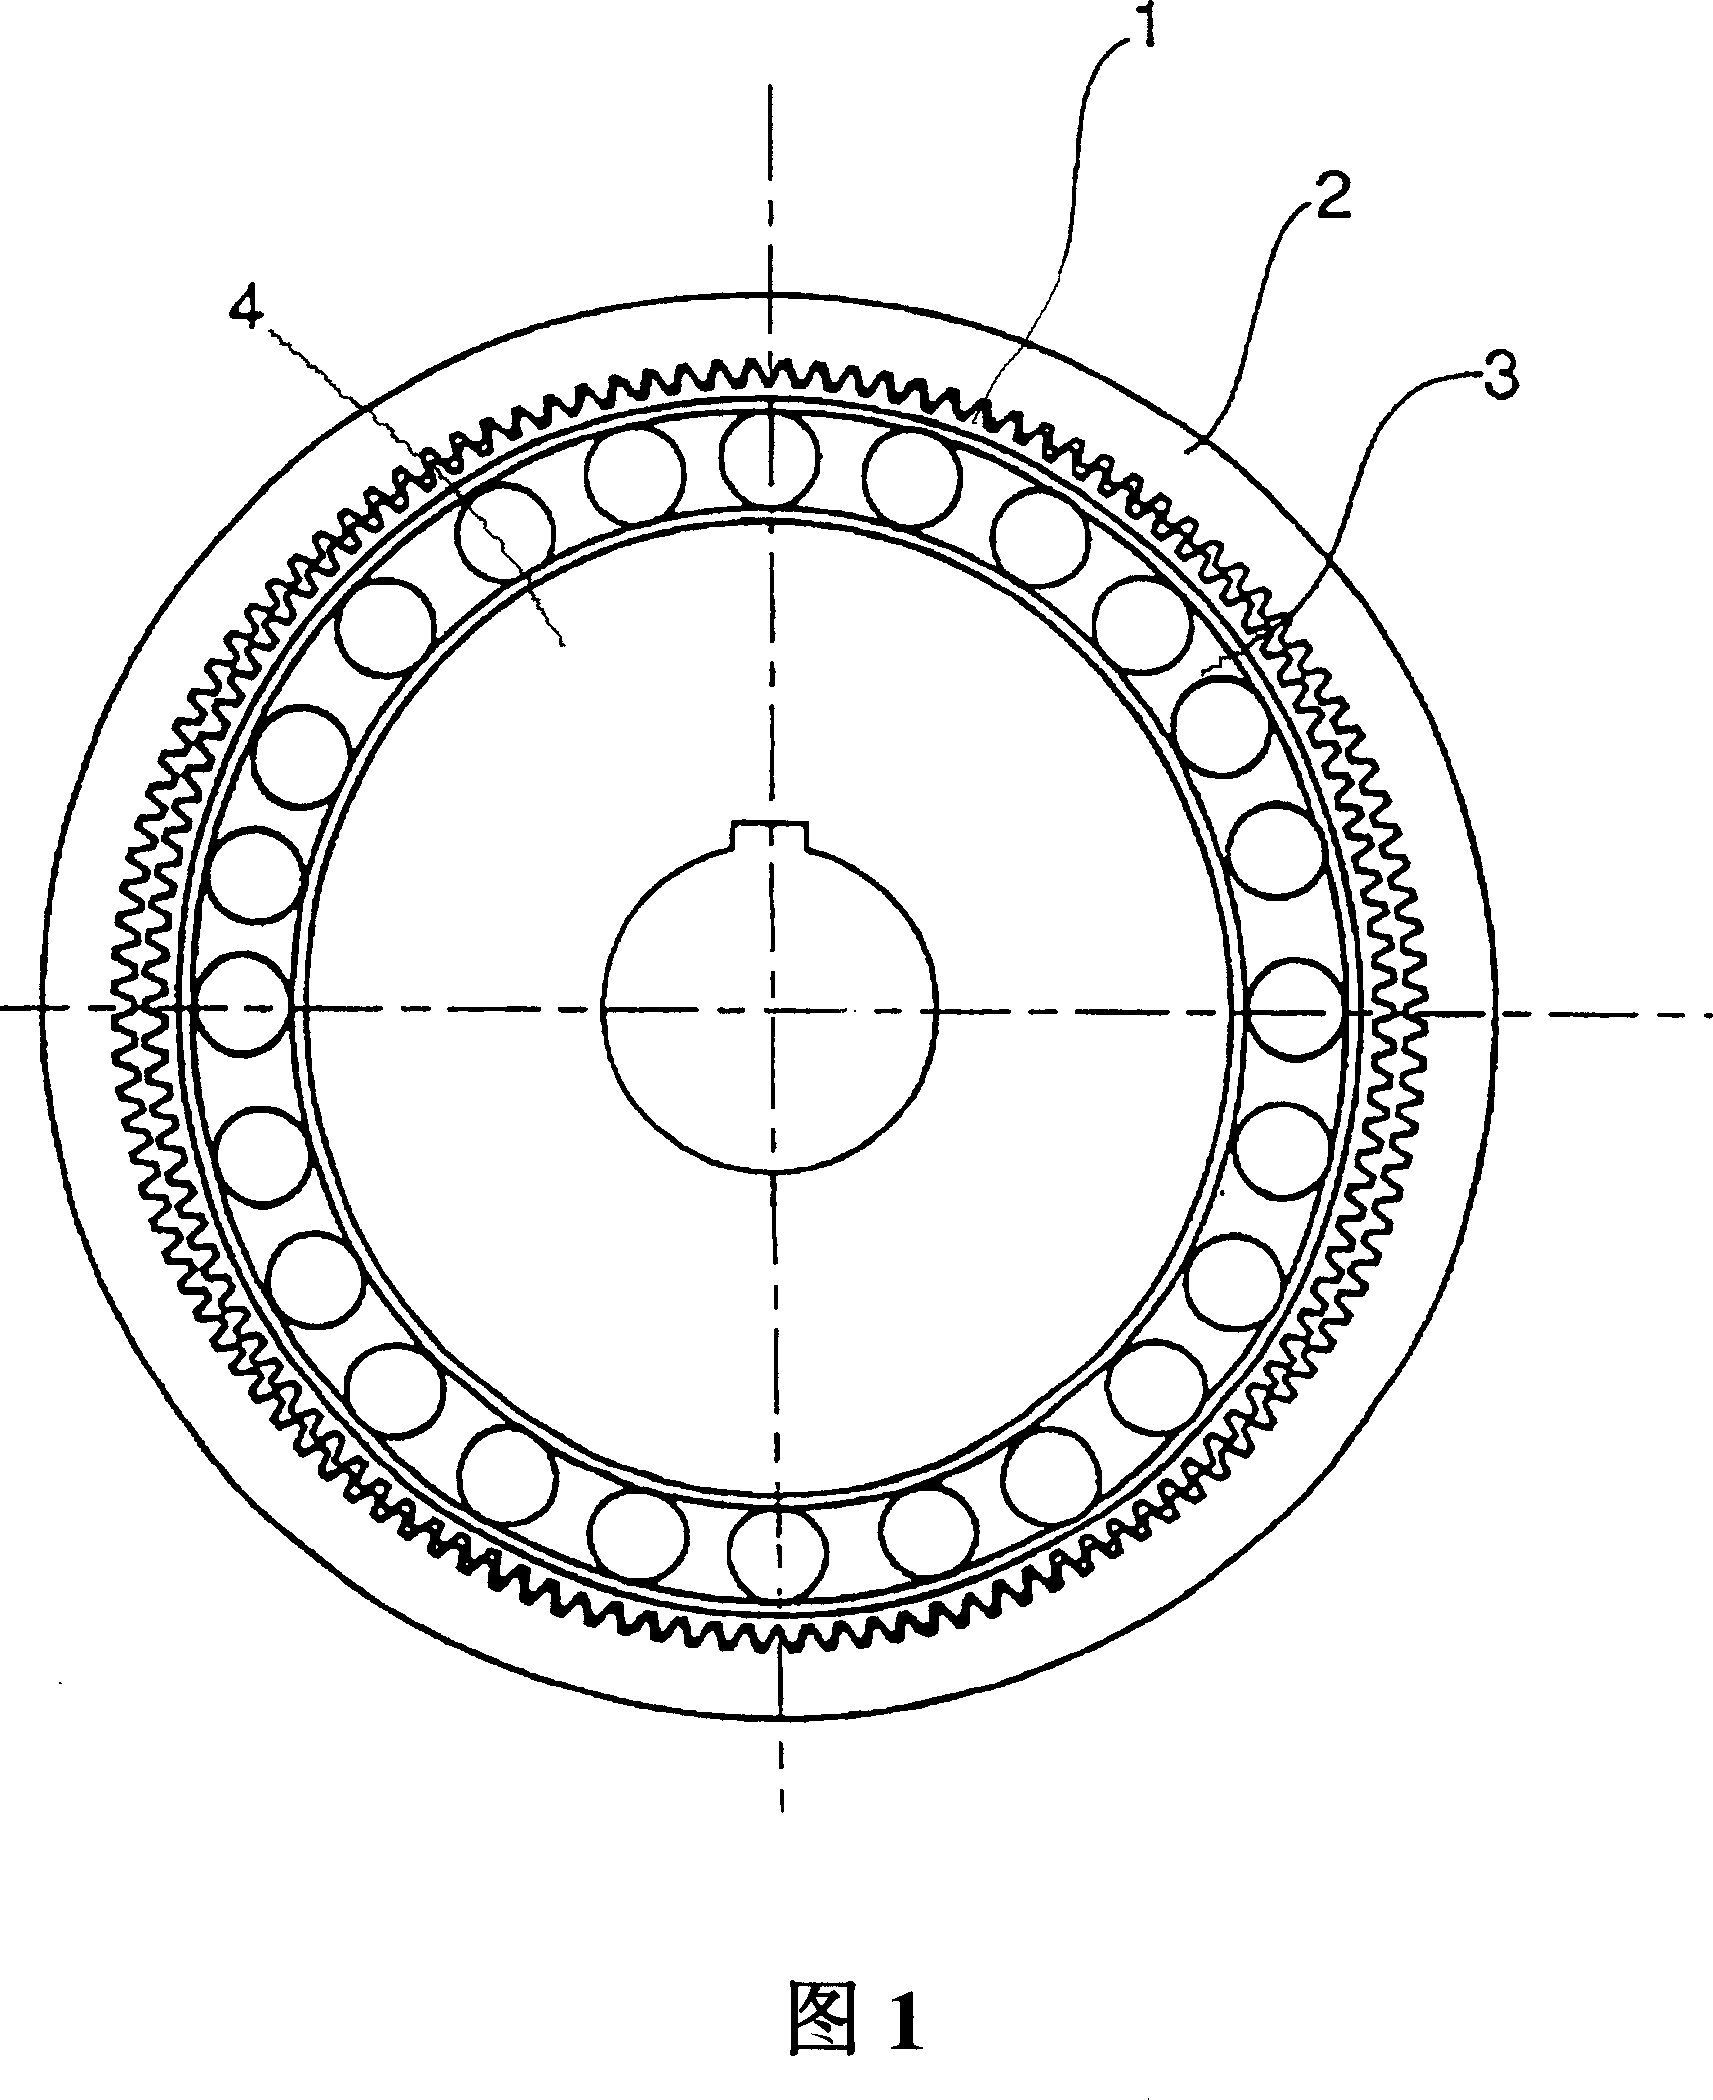 Three-dimensional harmonic wave gear with involute tooth outline